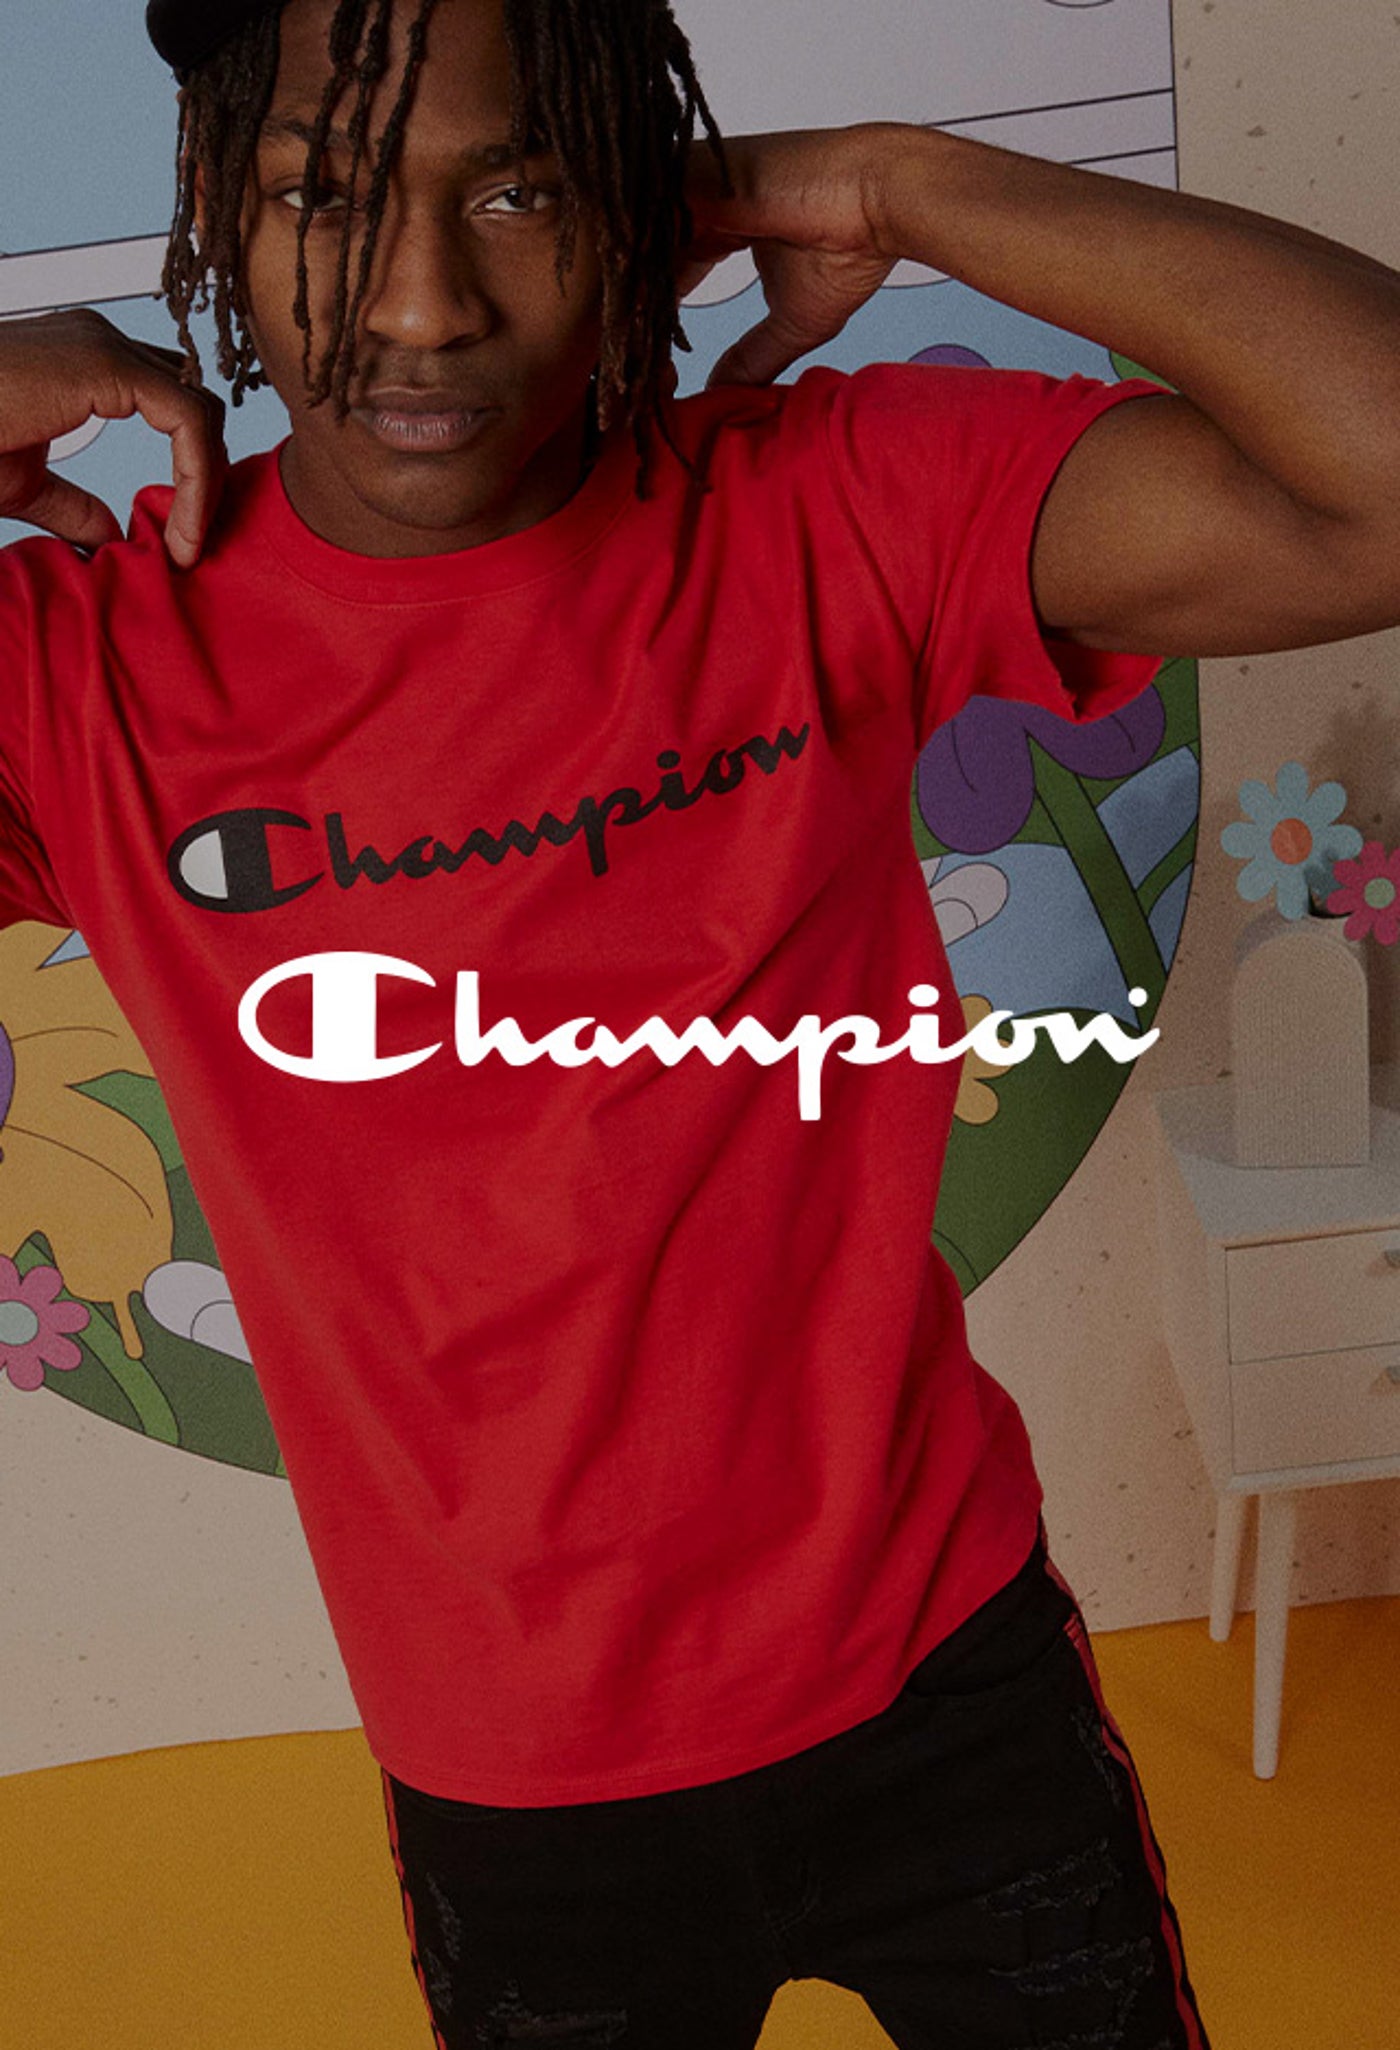 Clothing by Champion